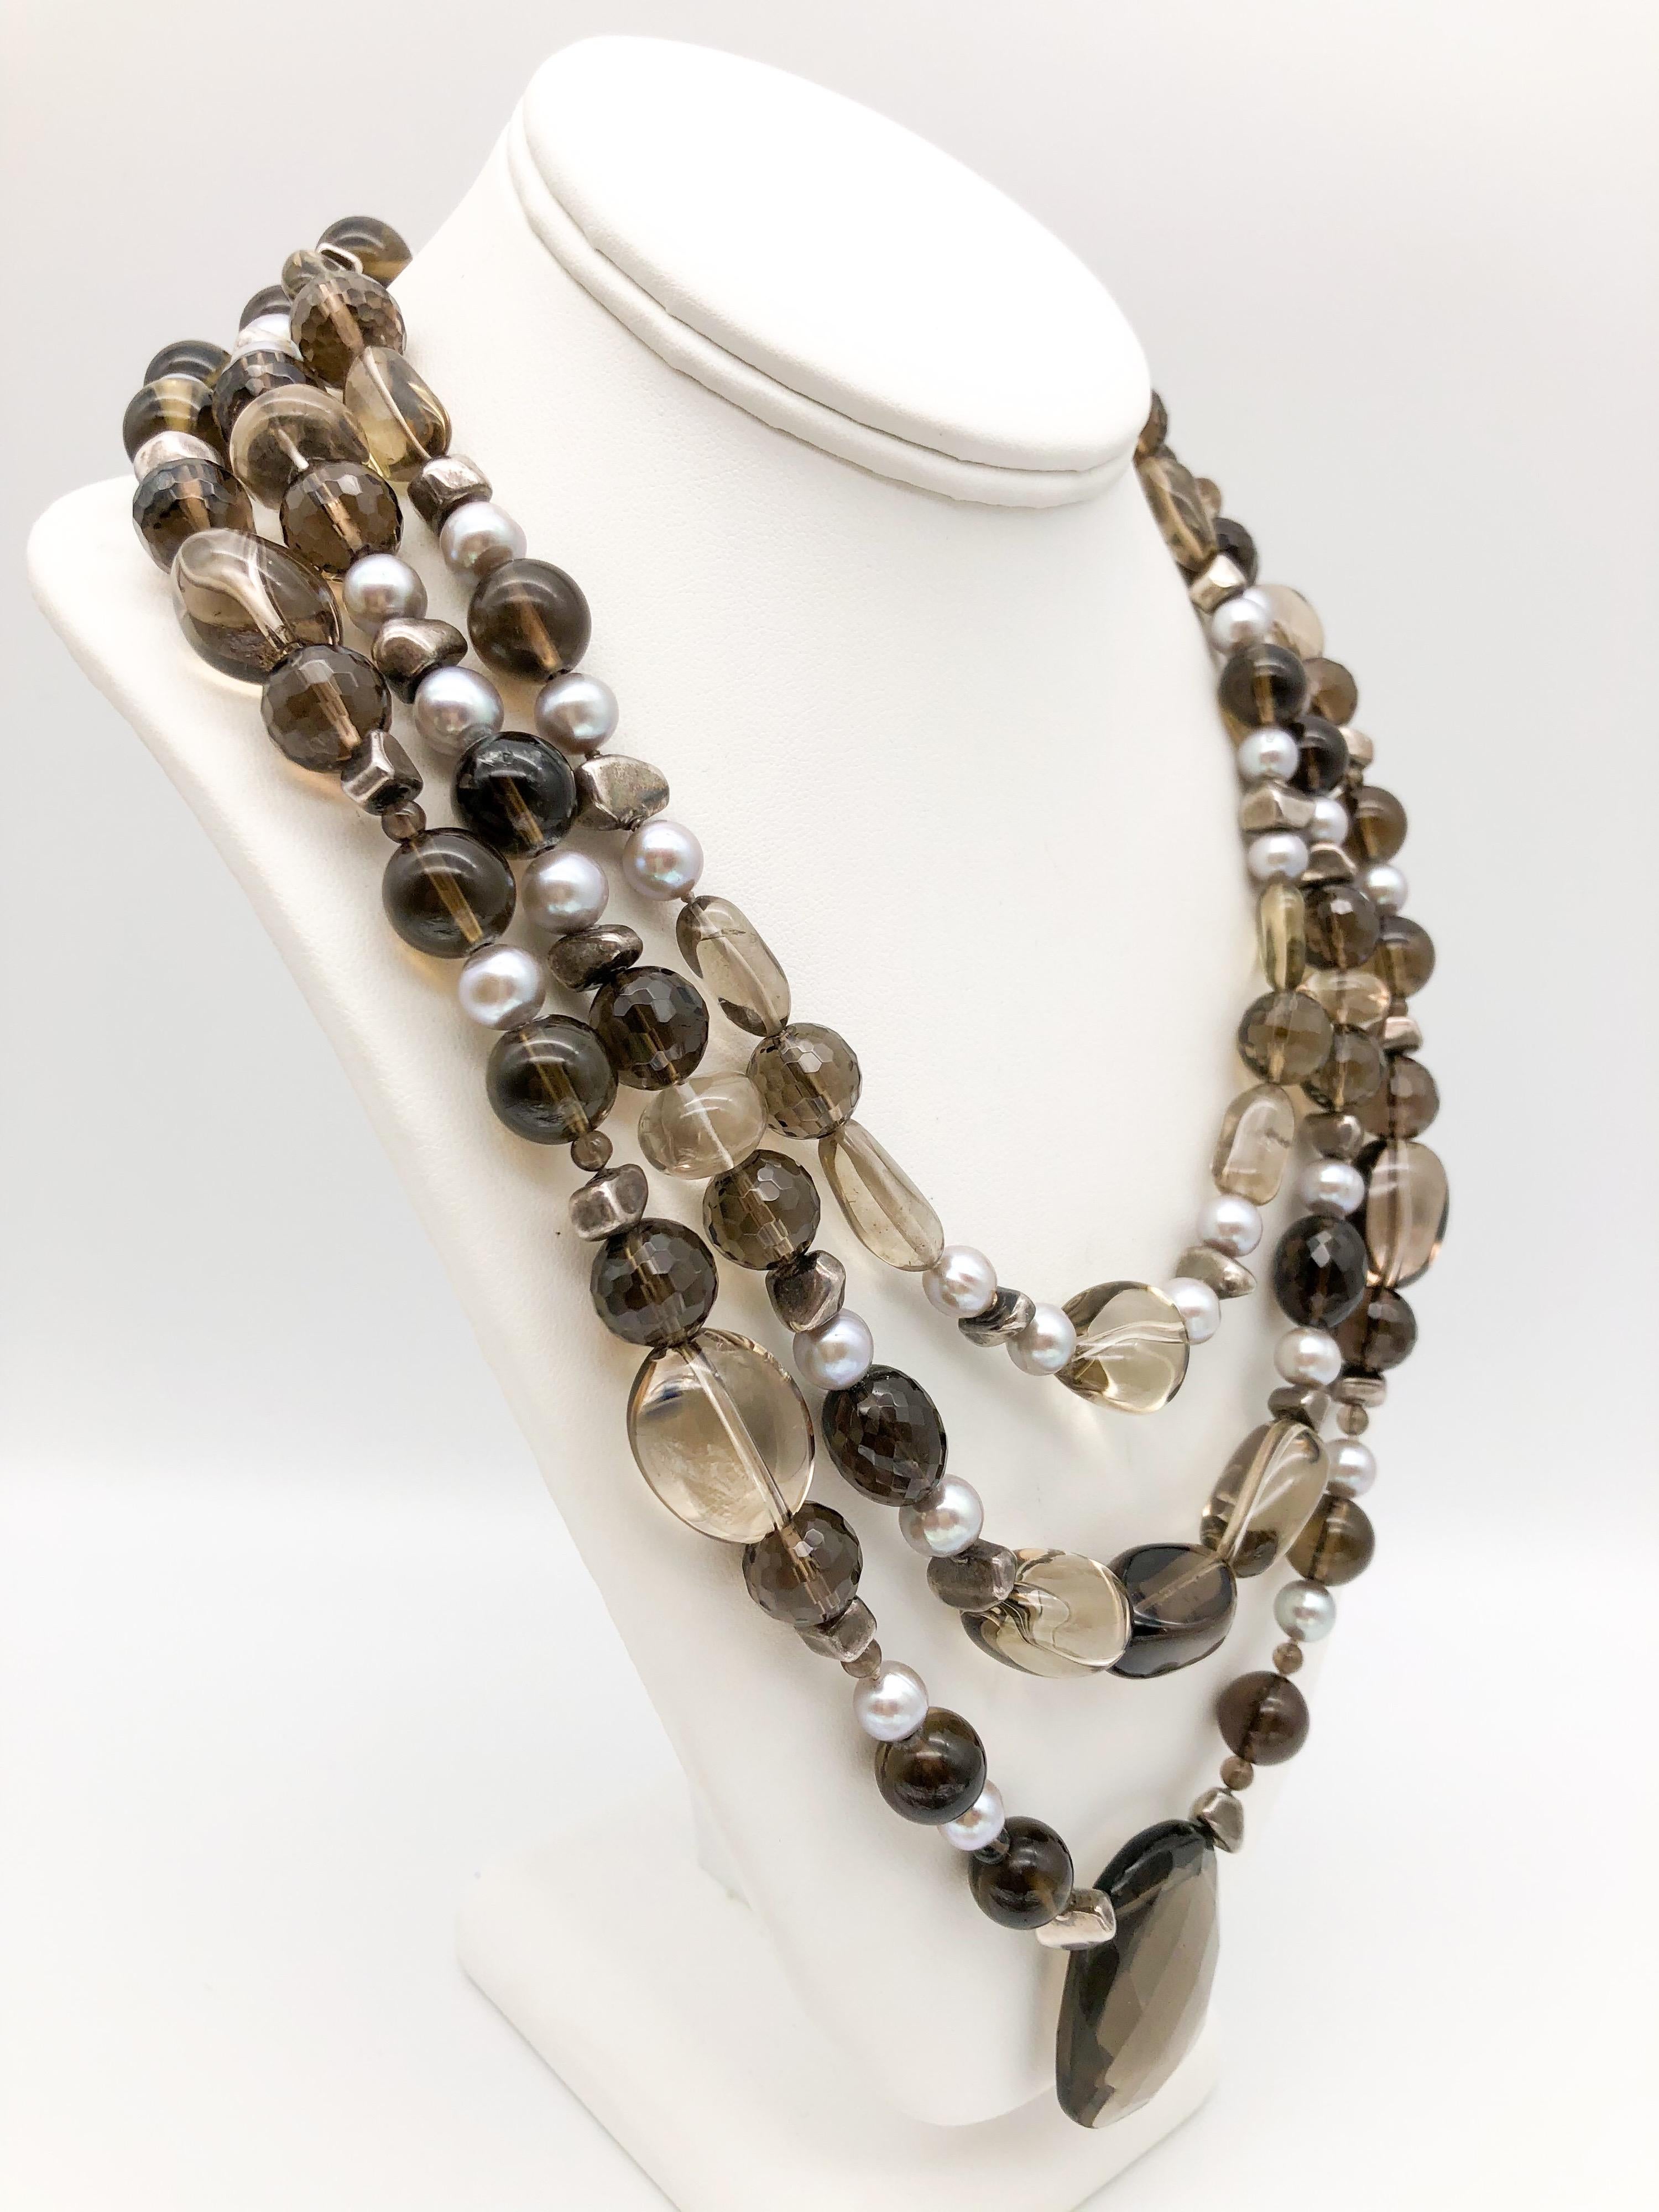 One-of-a-Kind
Three-strand Whiskey Quartz faceted and polished beads sparkles amidst the grey freshwater pearls and the sterling silver spacers. Three sizes and shapes of Quartz to create a graduated matinee length. The necklace is finished with a